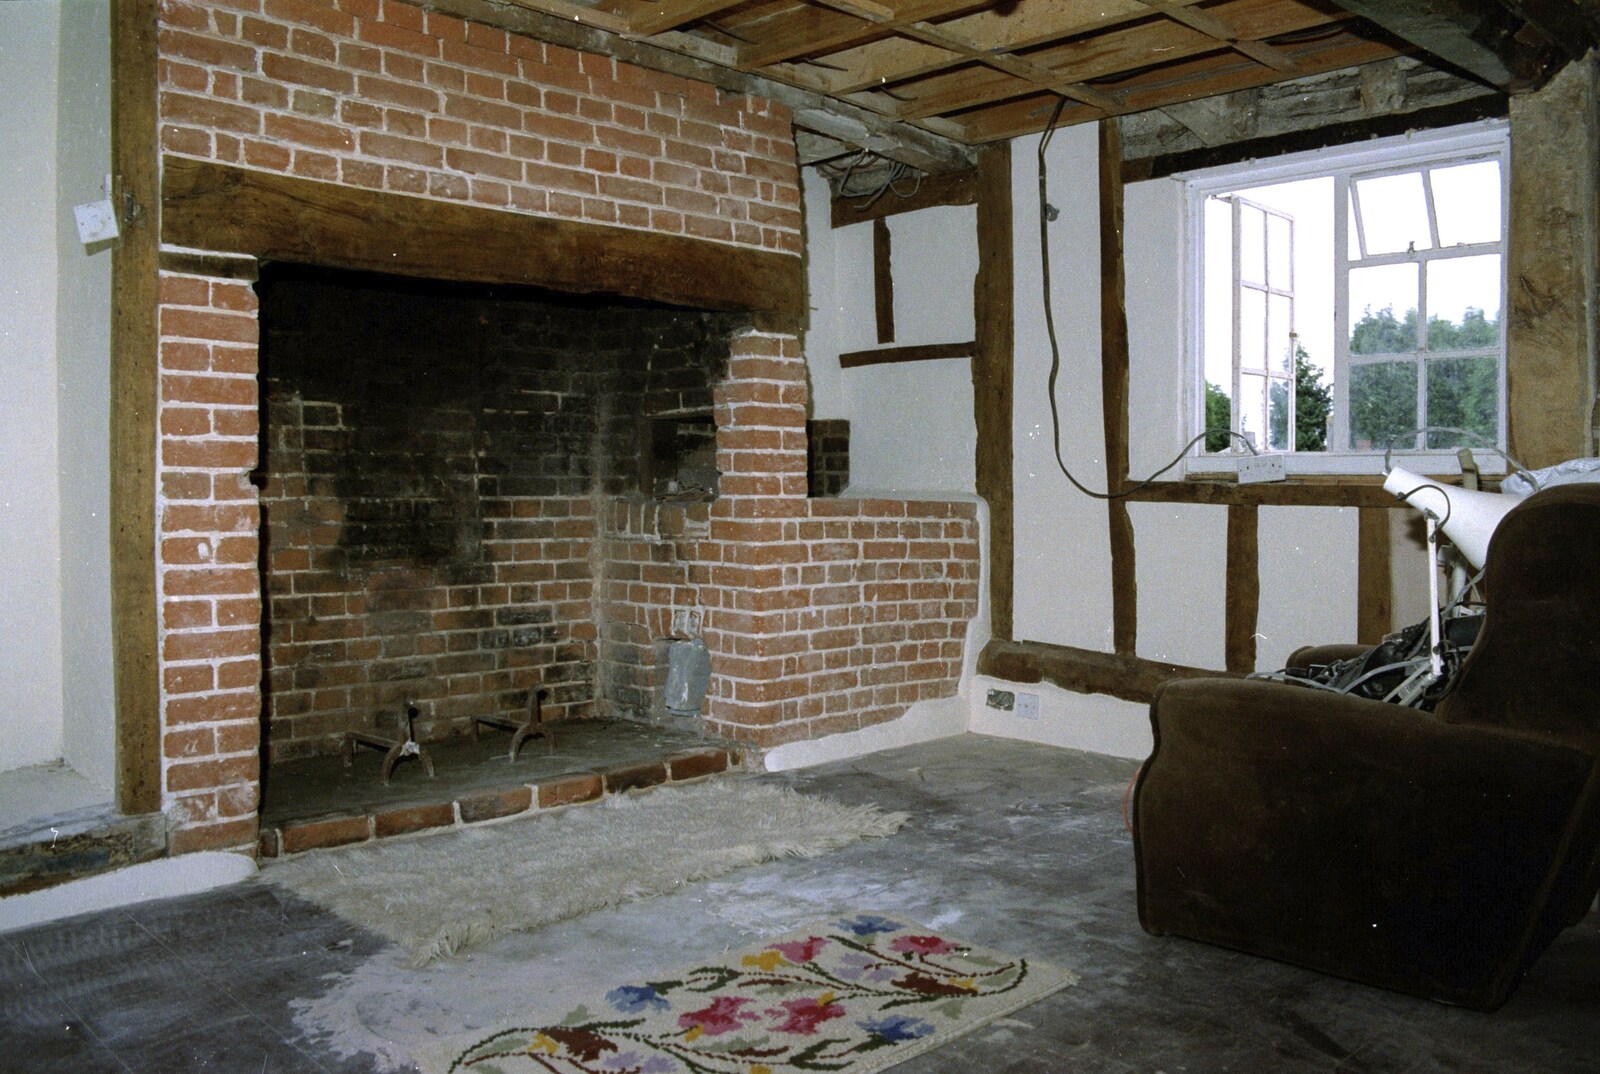 The inglenook is cleaned out and restored from A Stripper at The Swan, Brome, Suffolk - 30th August 1994